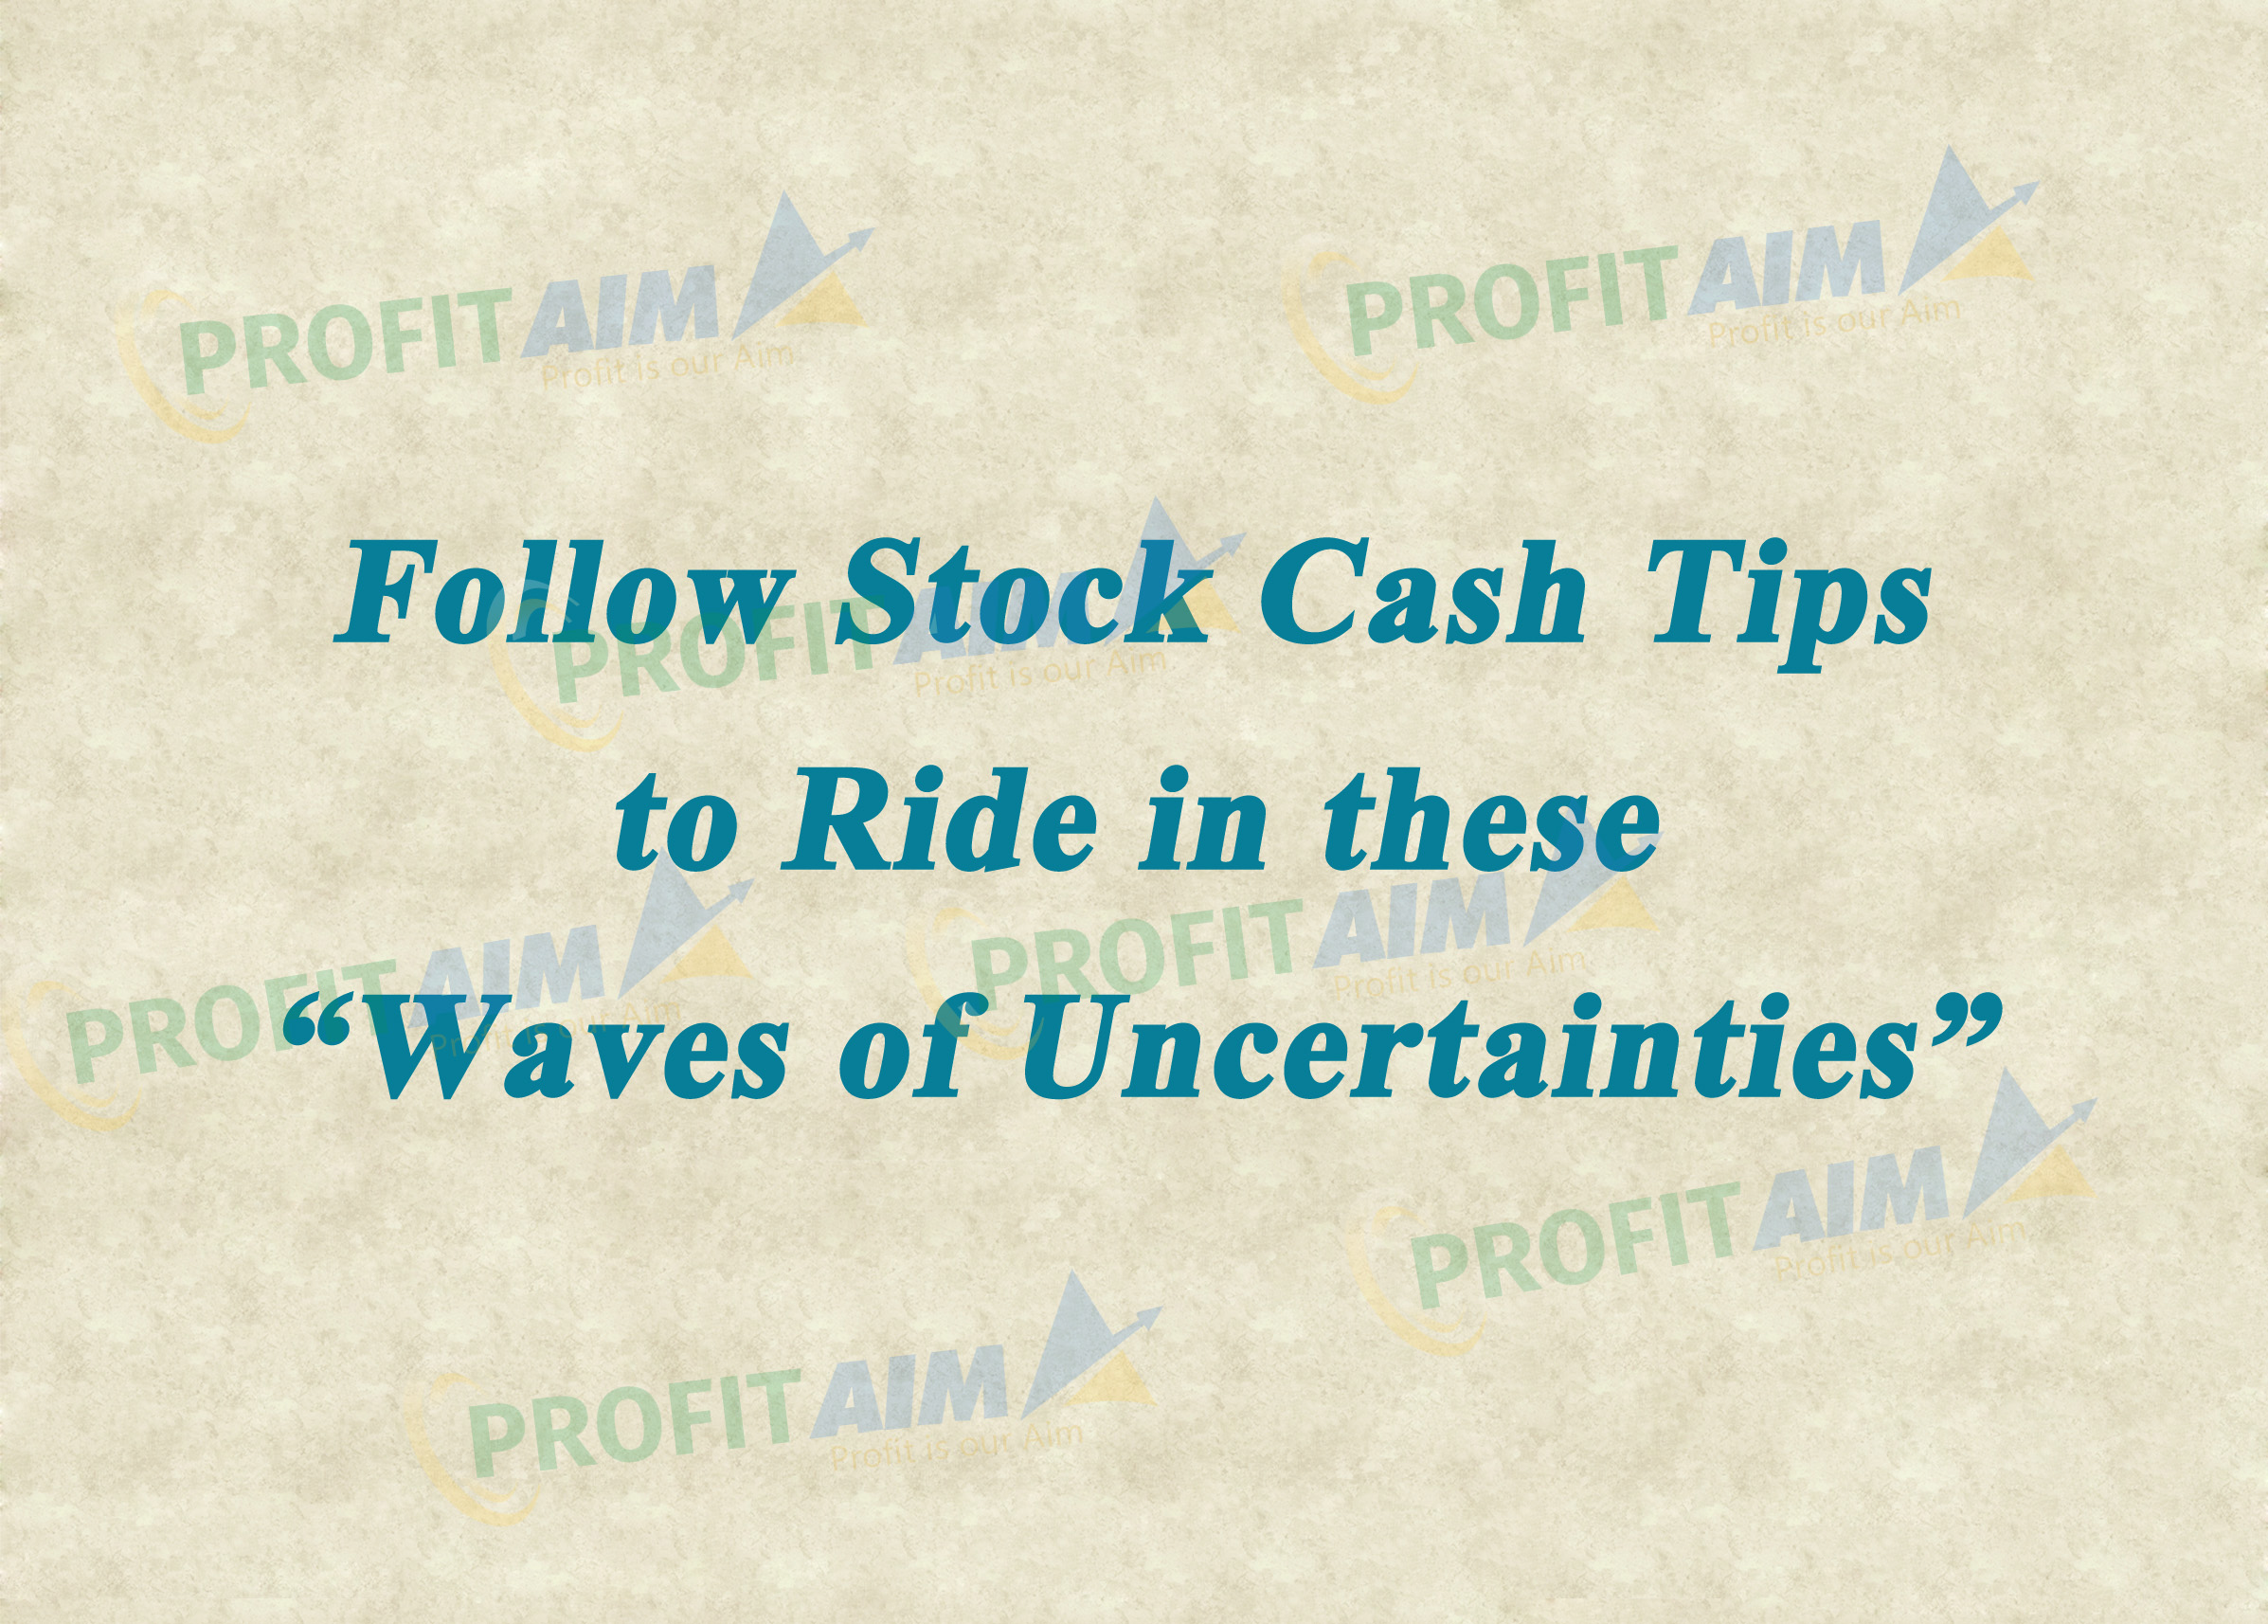 Follow Stock Cash Tips to Ride in these Waves of Uncertainties